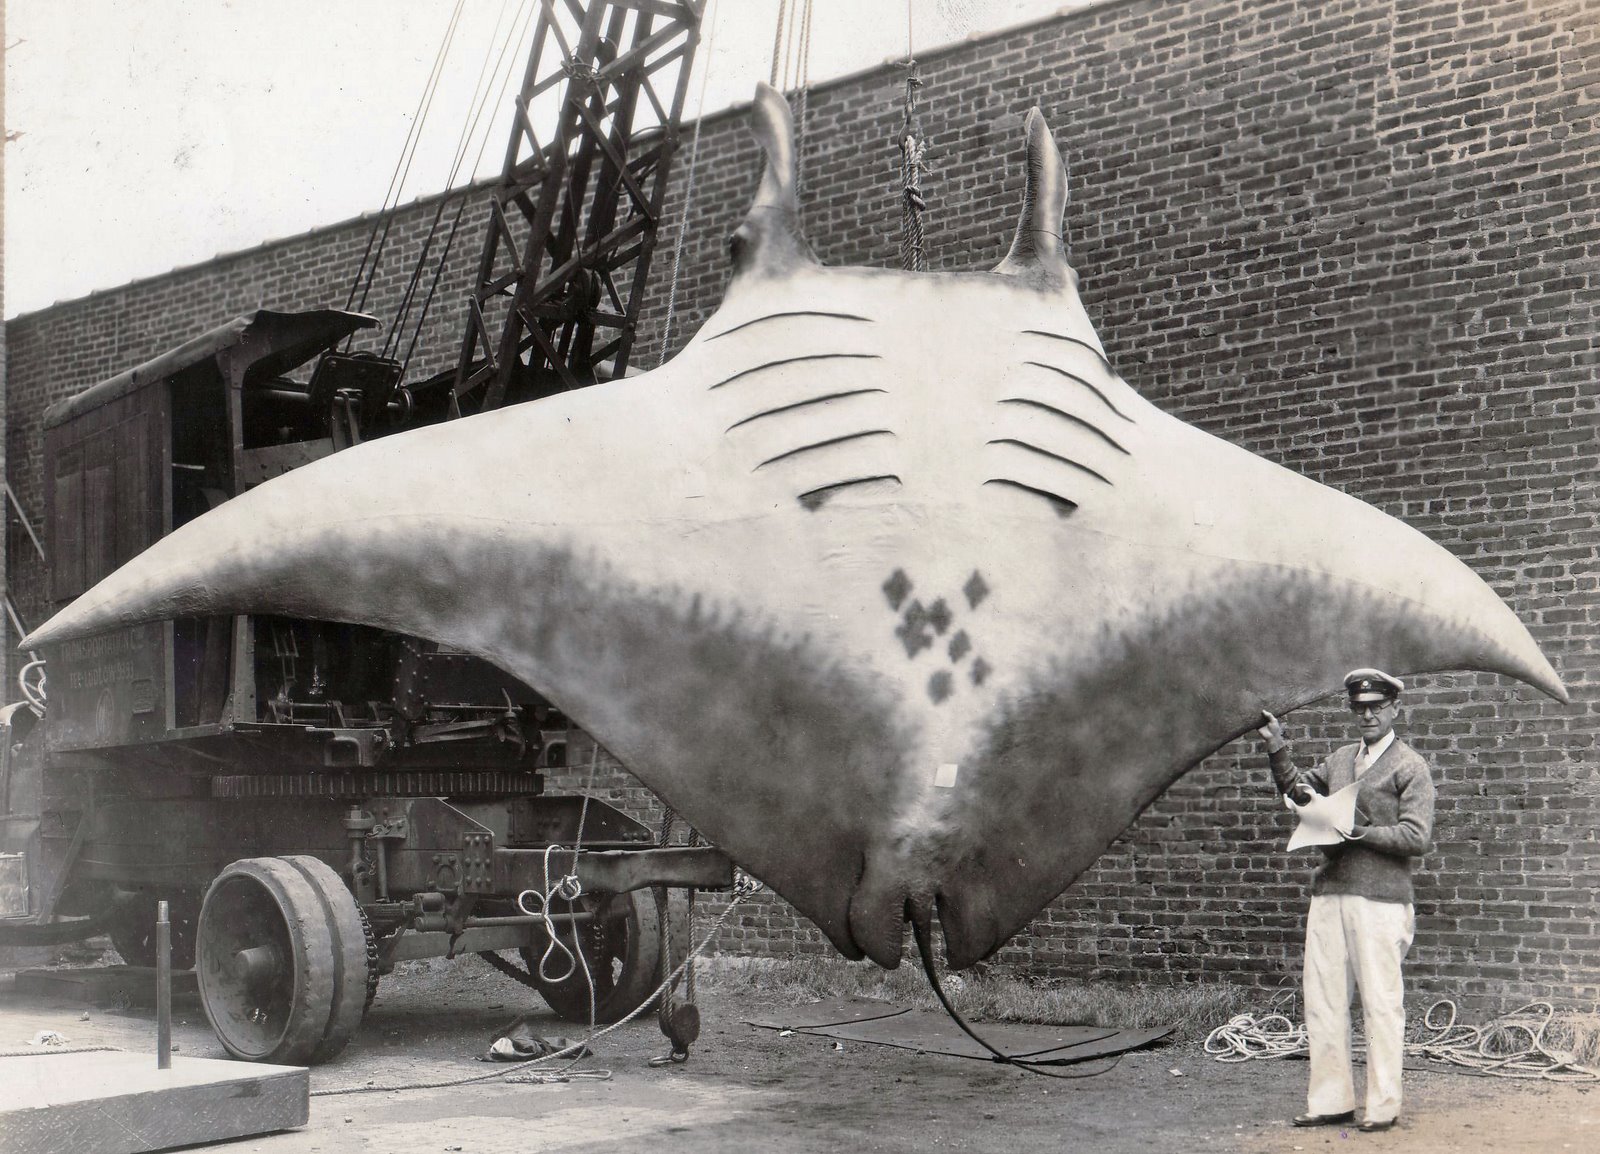 The "Great Manta" that was captured by Captain A.L. Kahn on August 26, 1933